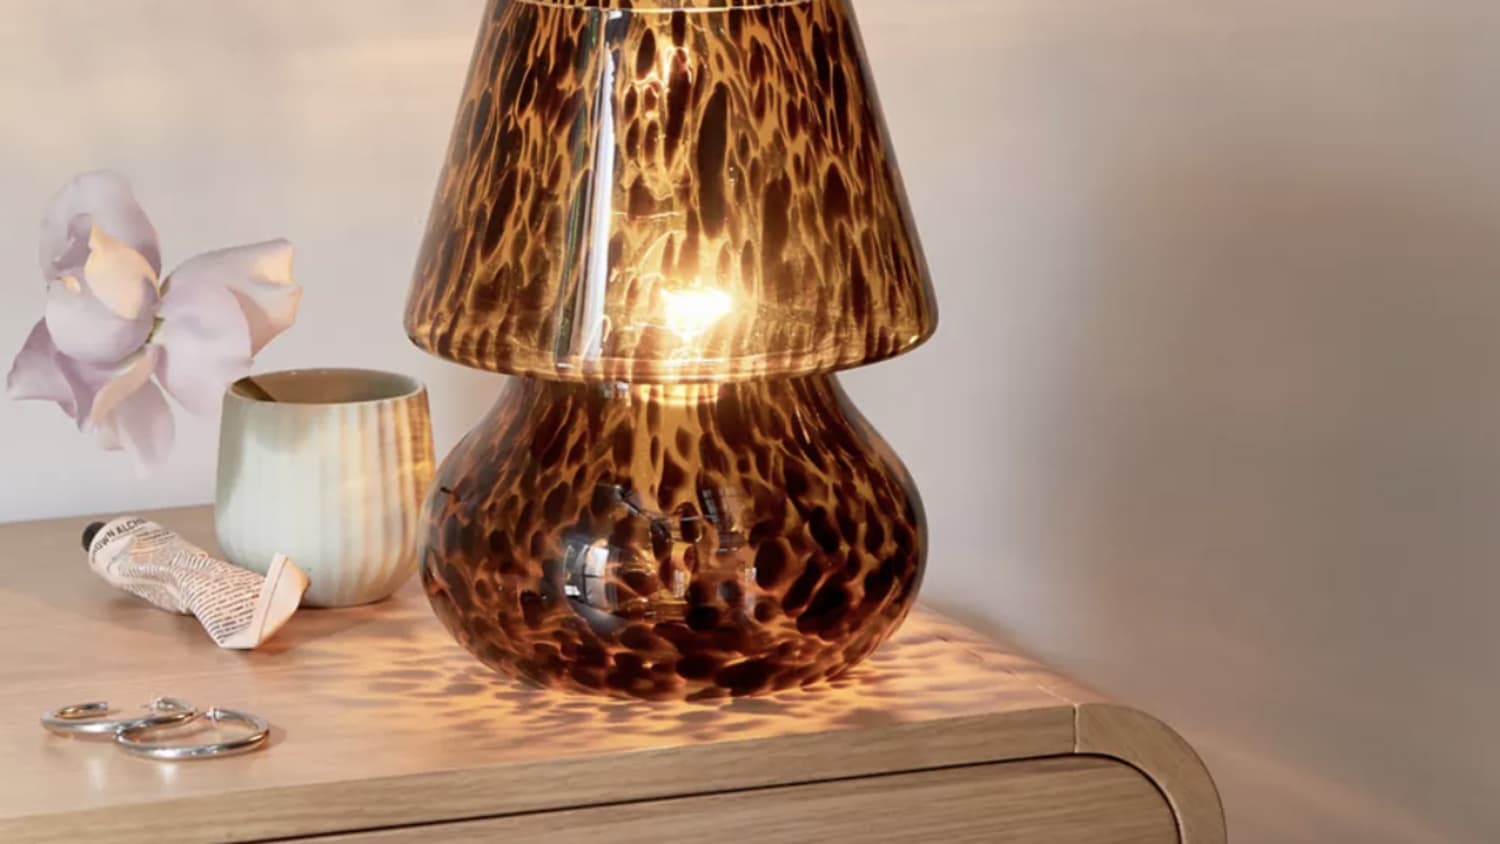 Brise Slid Lingvistik Urban Outfitters Is Selling a New Version of the Mushroom Lamp | Apartment  Therapy